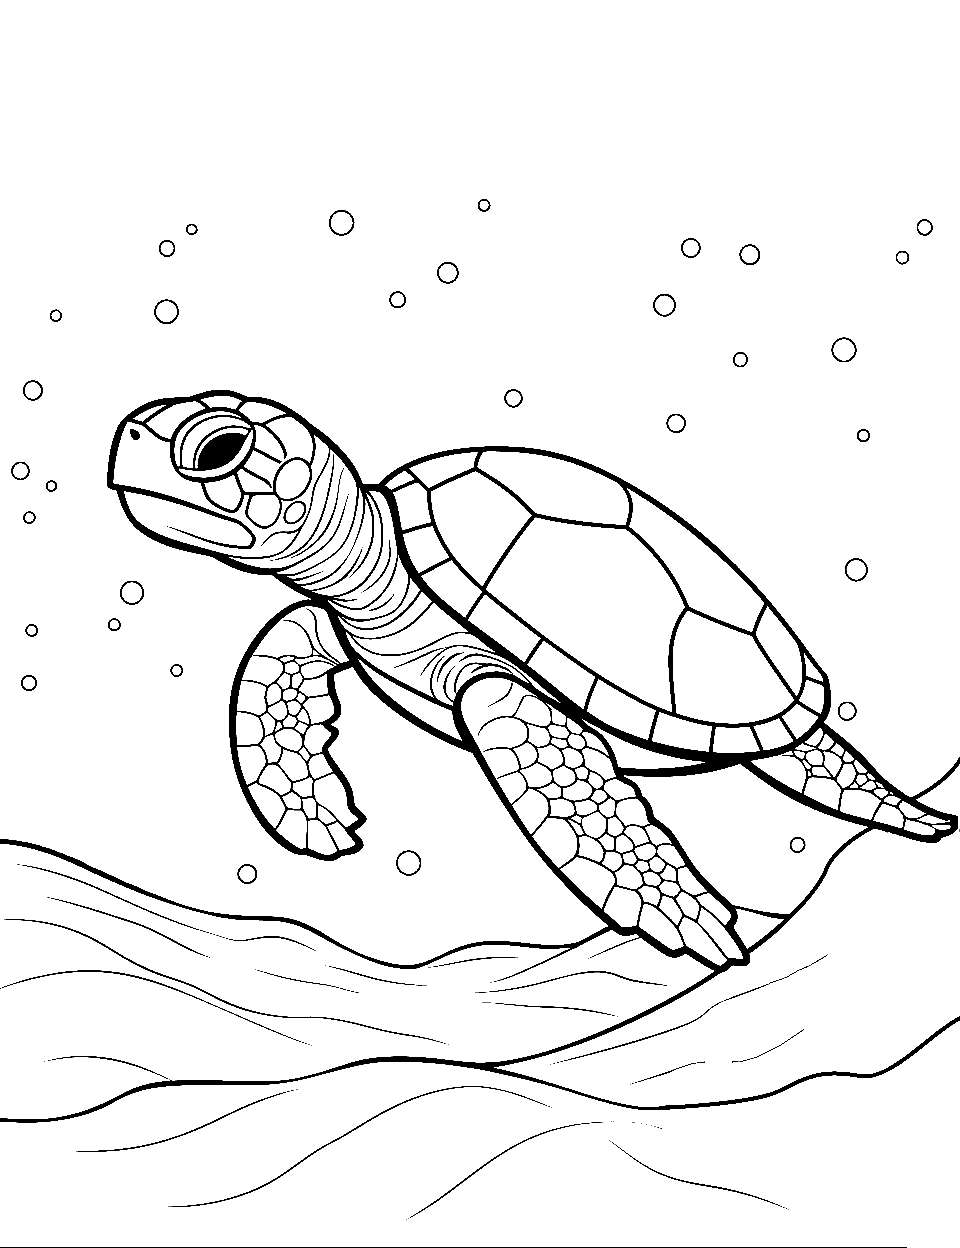 Little Turtle, Big World Turtle Coloring Page - A small turtle looking out into a vast ocean.